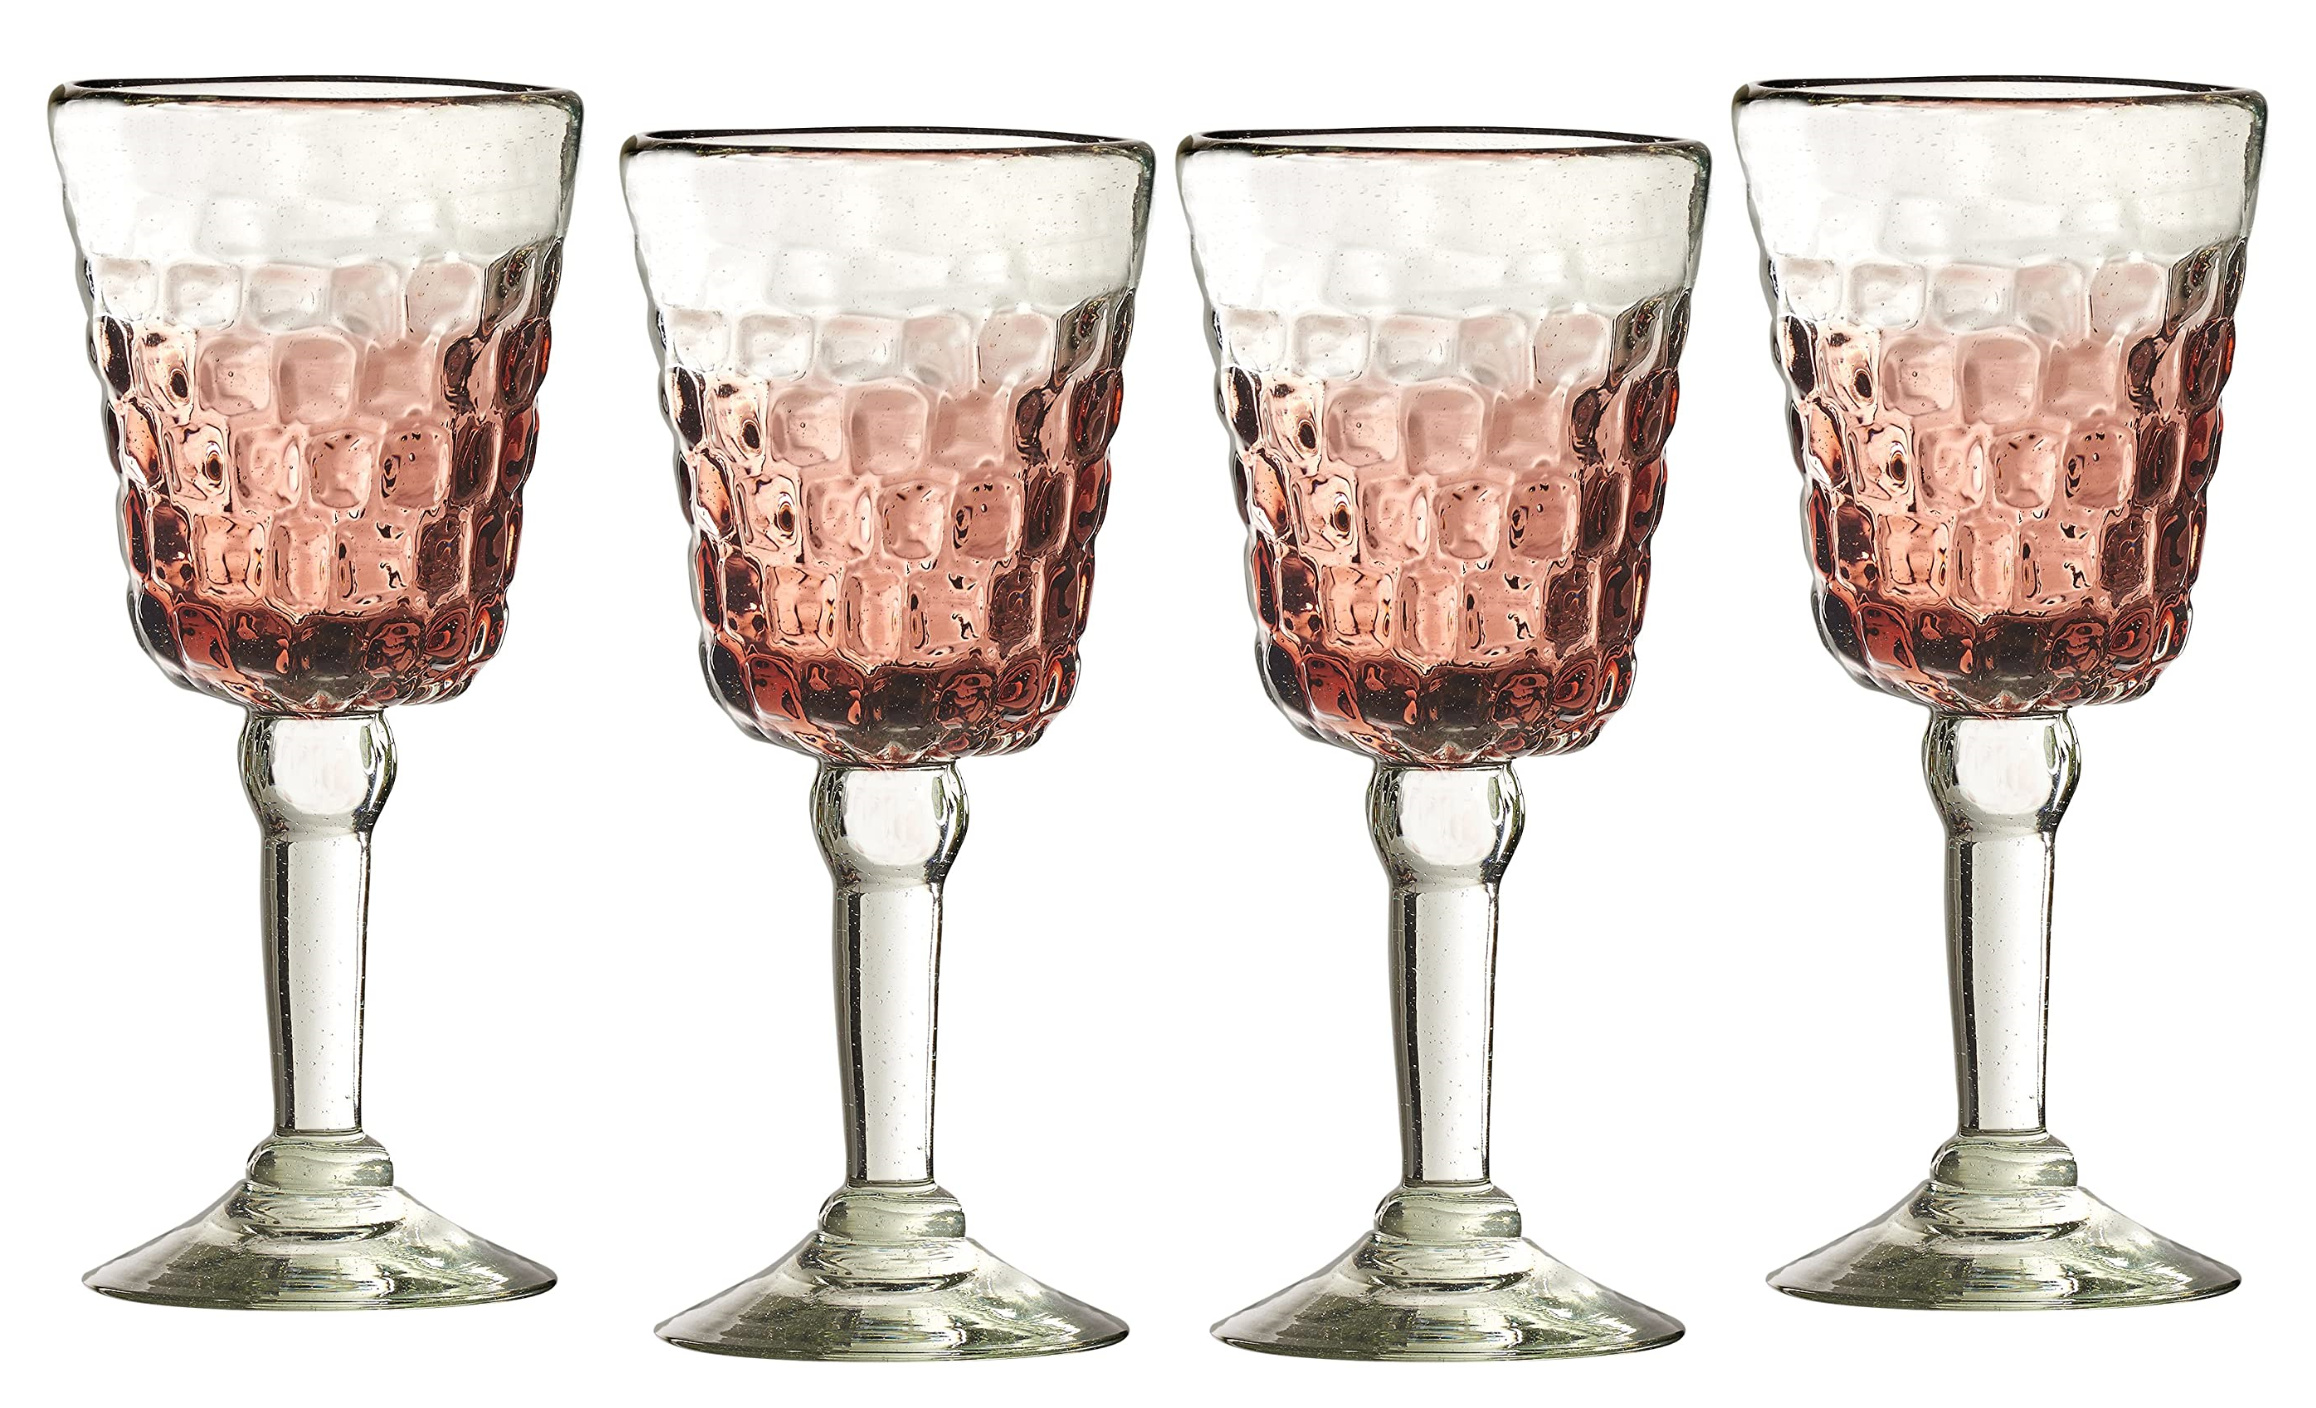 Goblet, Amici Home, Recycled glass, Eye-catching amethyst hue, 2320x1410 HD Desktop